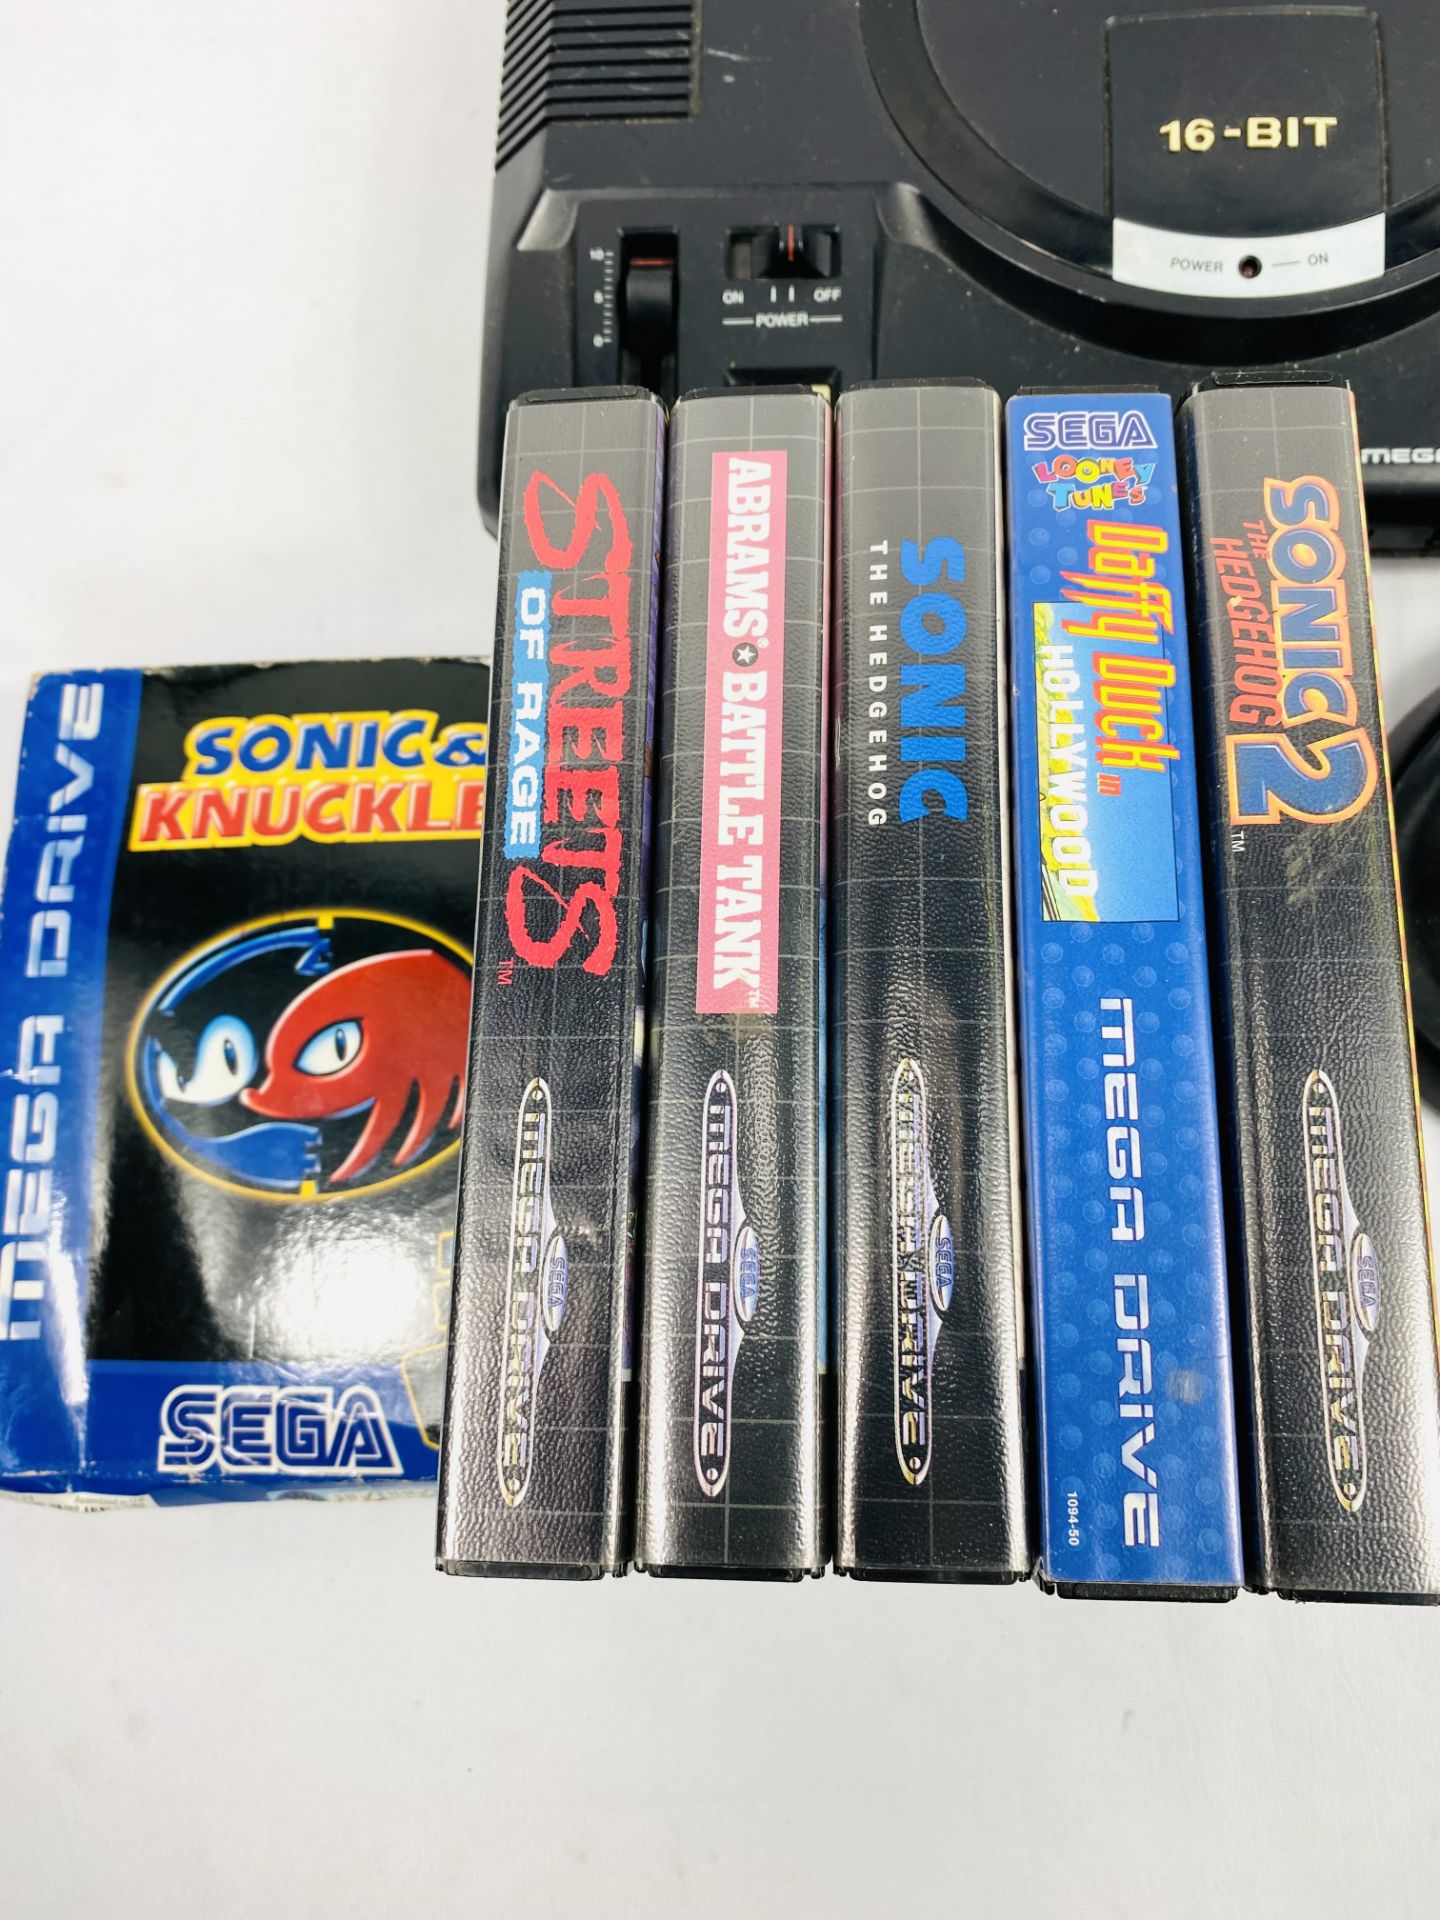 Sega Mega drive with games and accessories - Image 2 of 4